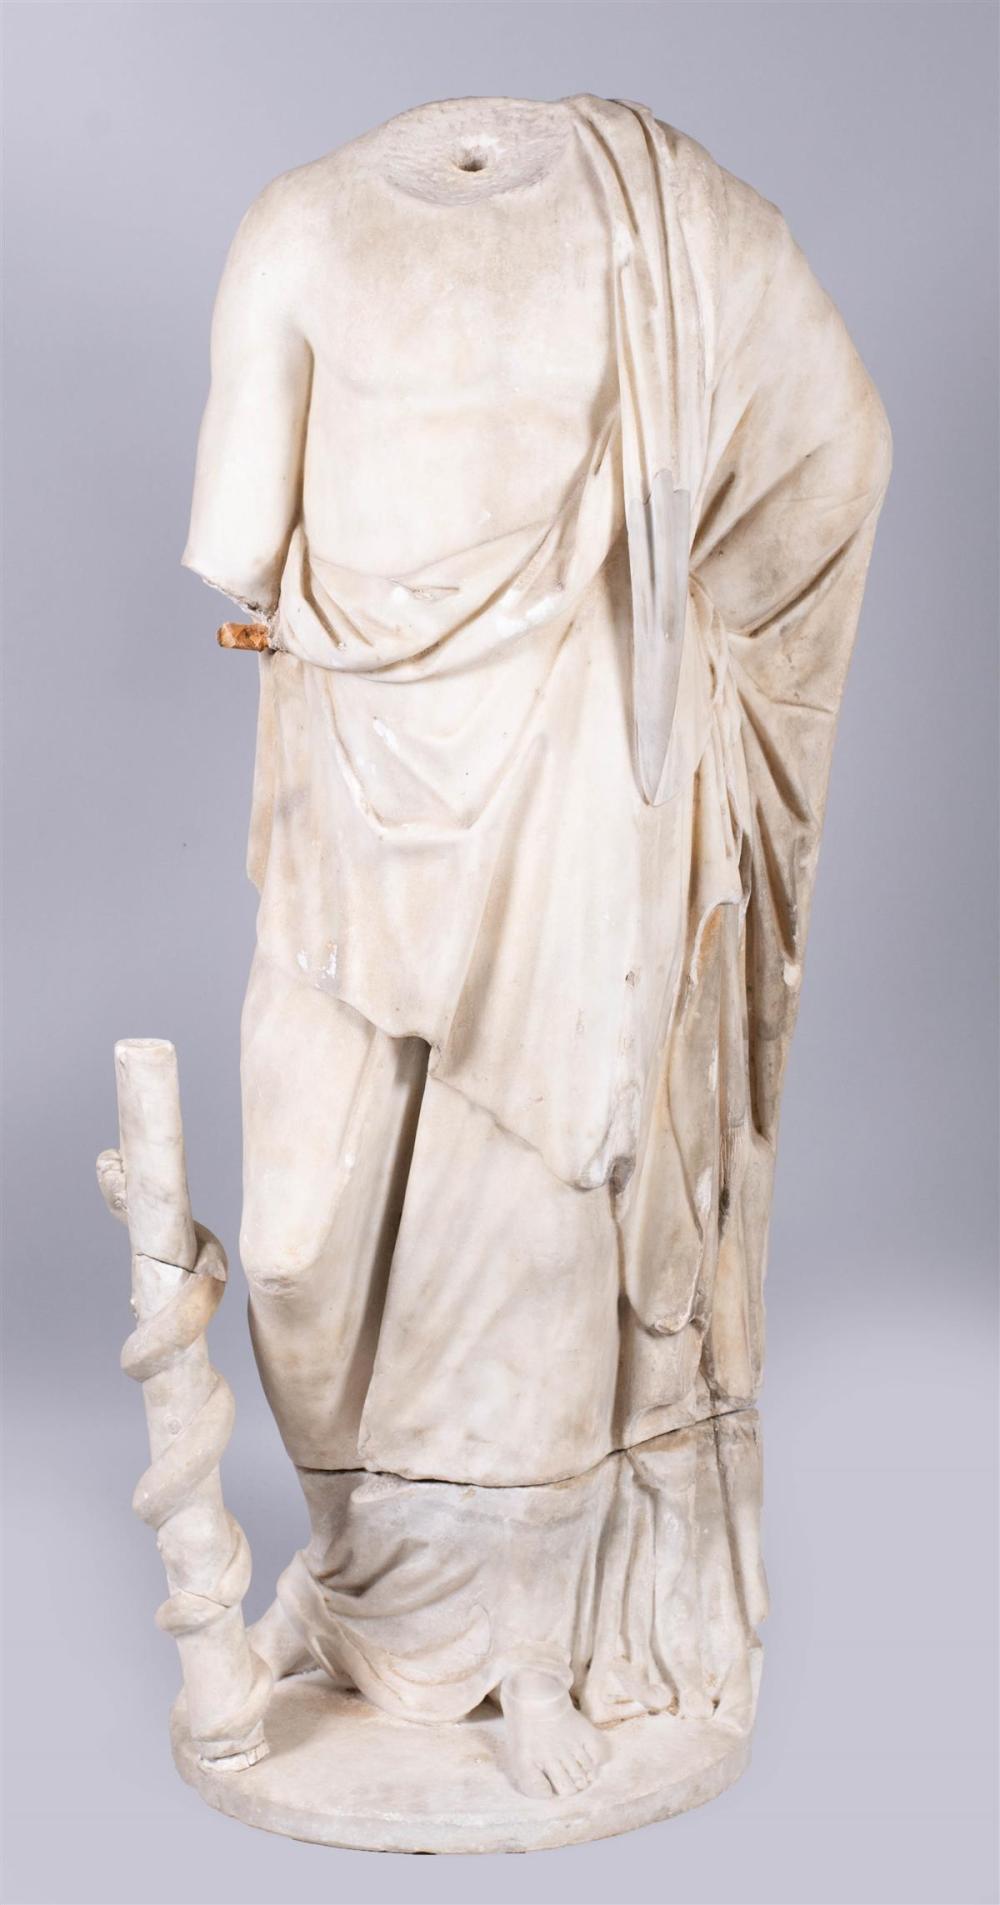 LARGE ROMAN MARBLE OF ASCLEPIUS,